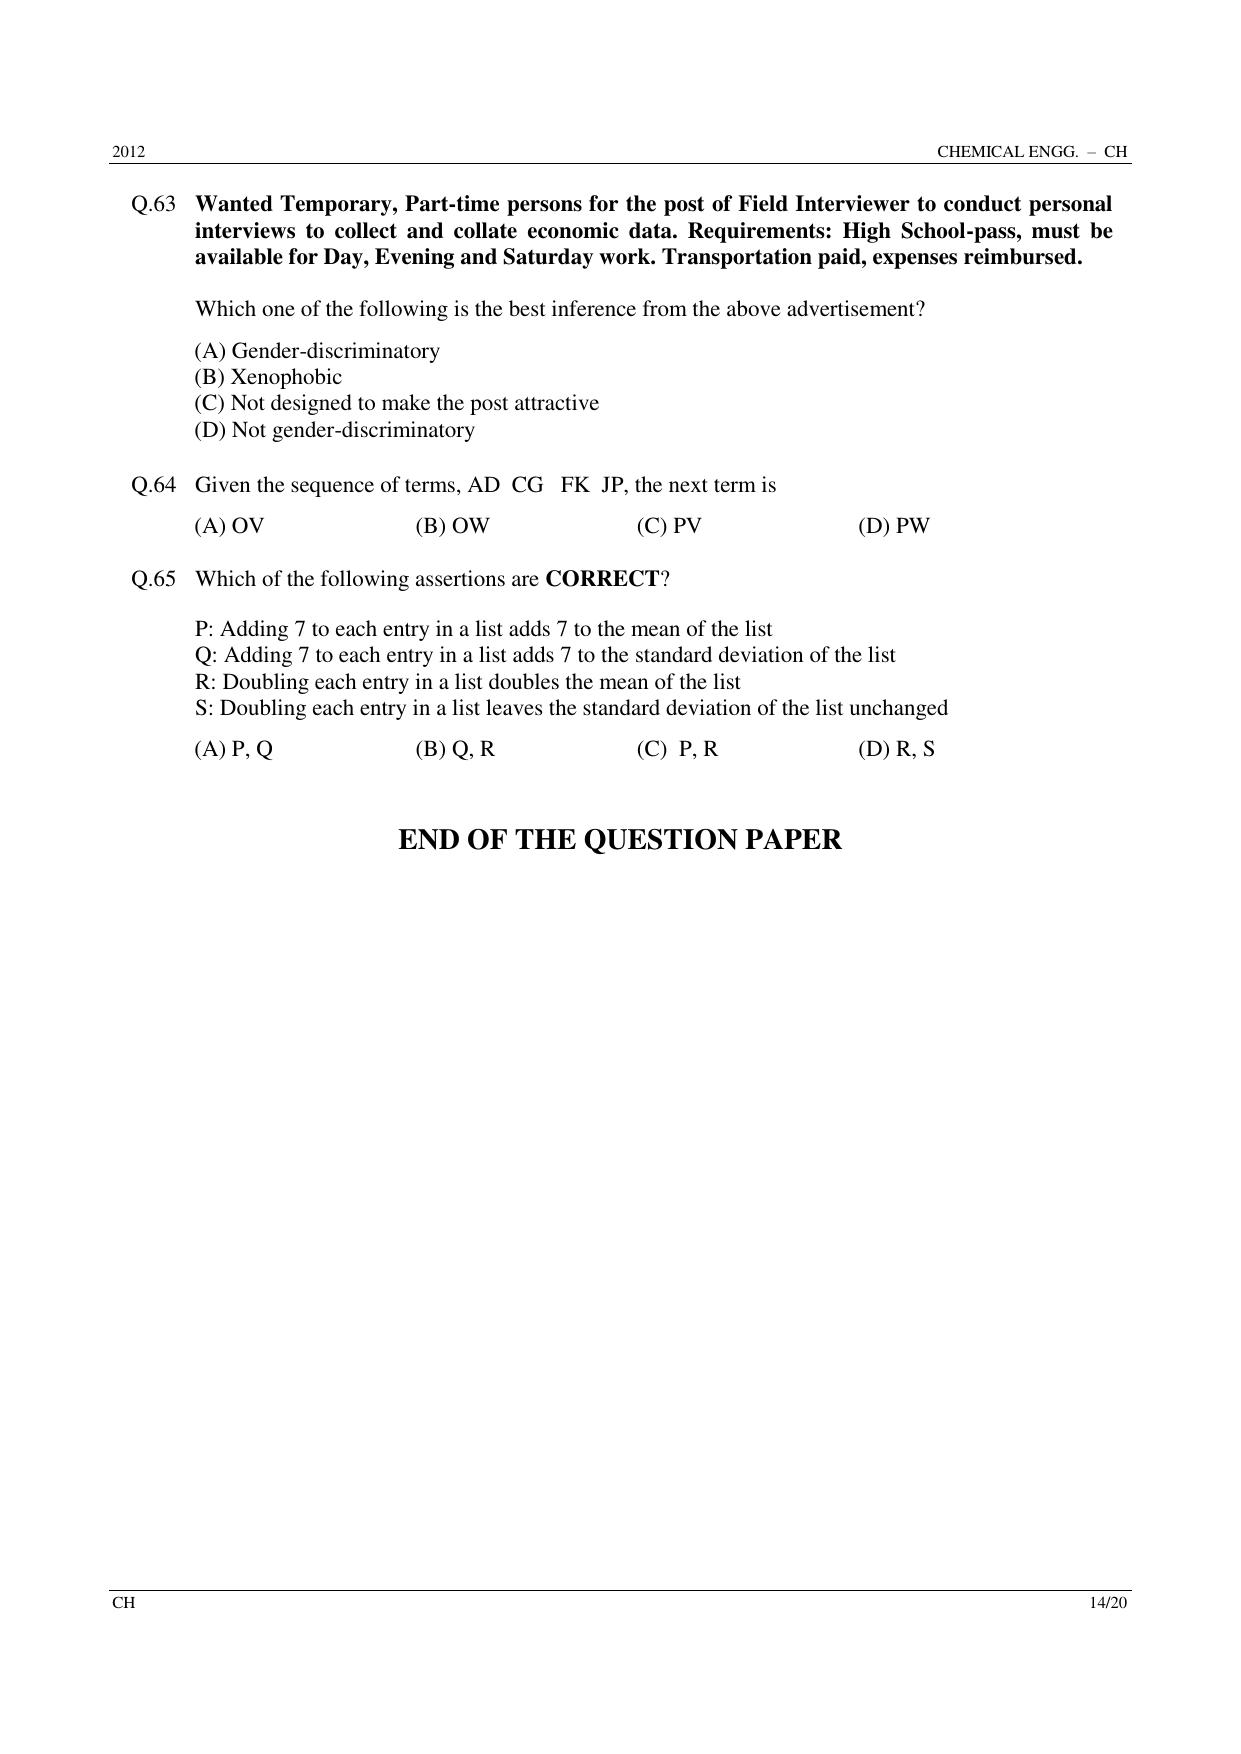 GATE 2012 Chemical Engineering (CH) Question Paper with Answer Key - Page 14